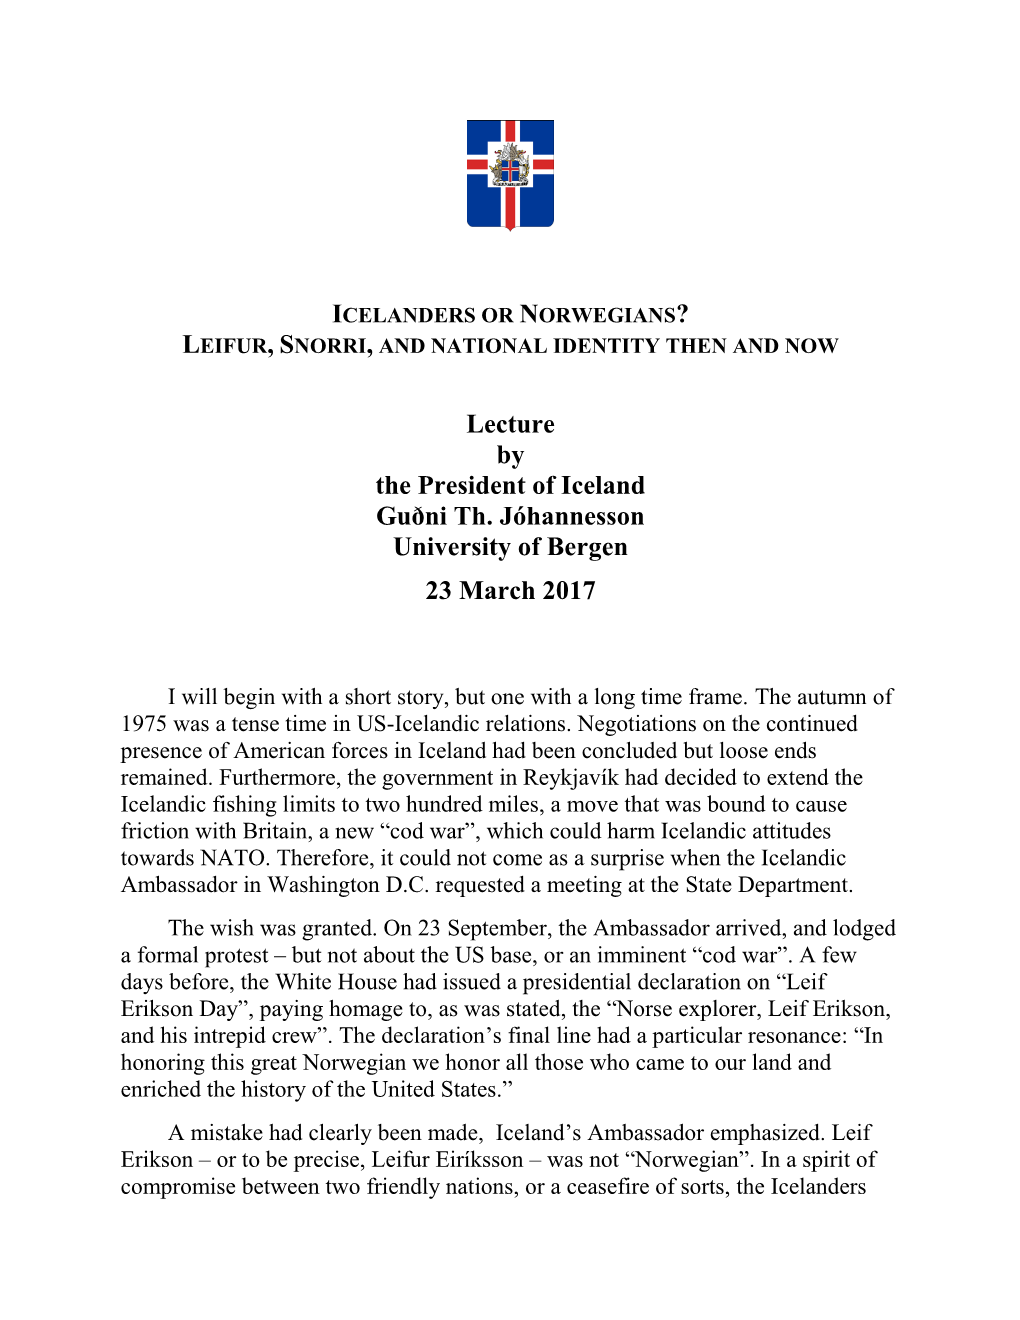 Lecture by the President of Iceland Guðni Th. Jóhannesson University of Bergen 23 March 2017